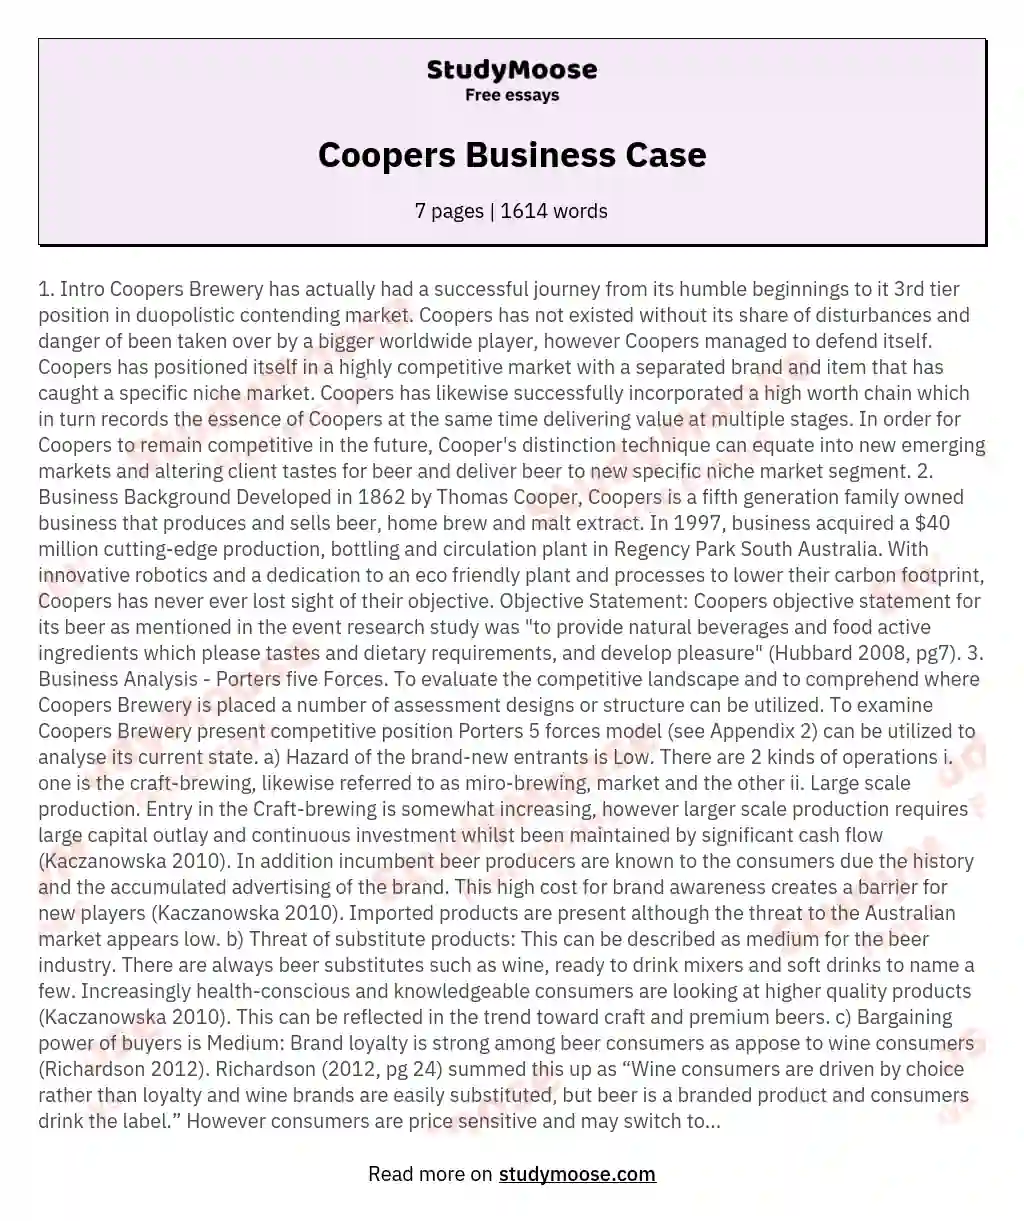 Coopers Business Case essay